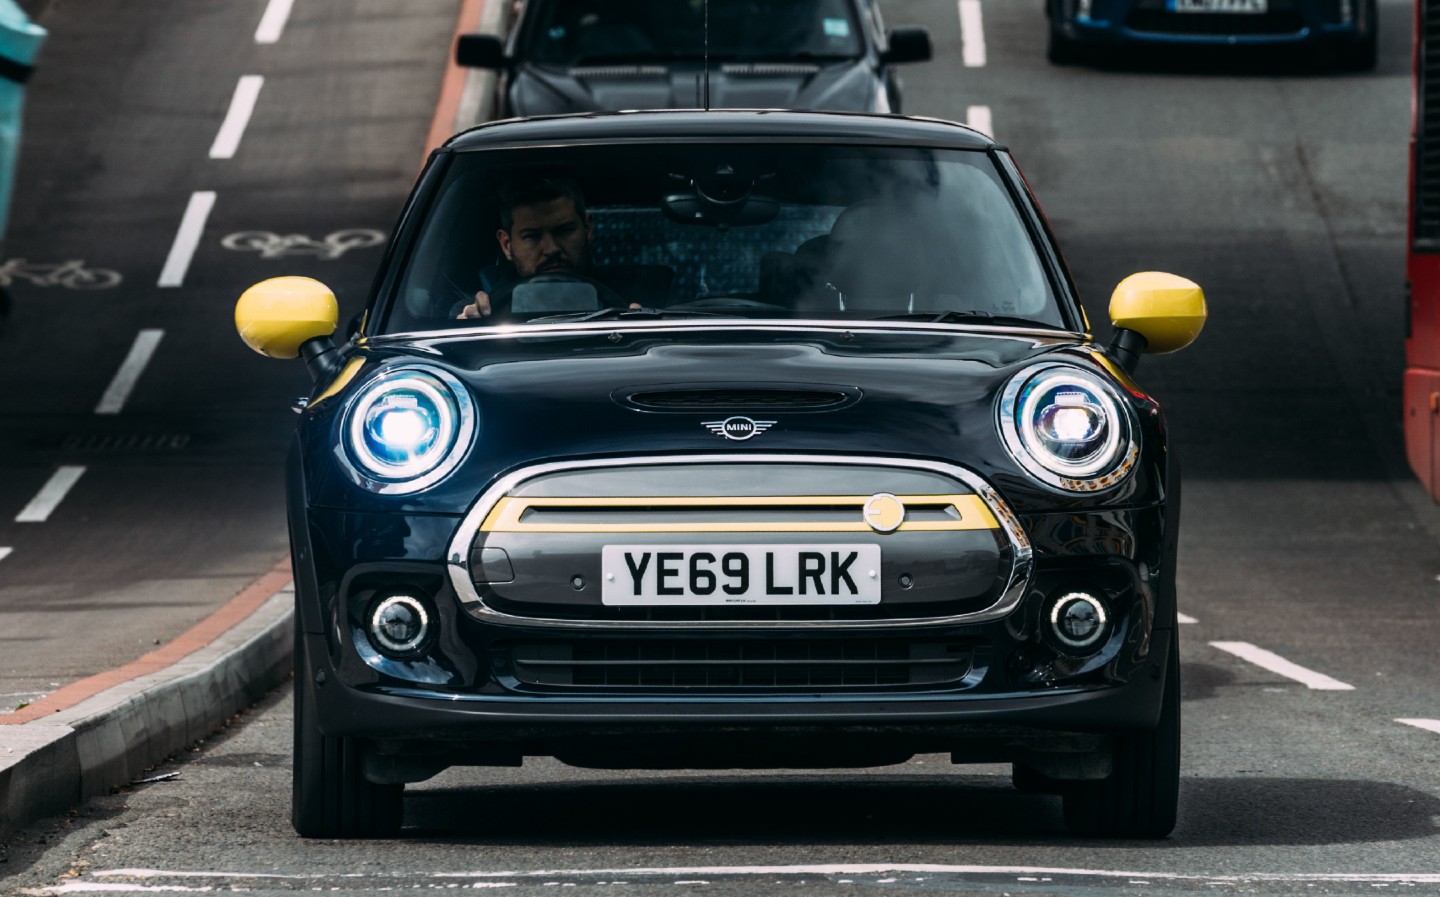 Five best and worst things about the Mini Electric - long-term review by Will Dron fro Sunday Times Driving.co.uk